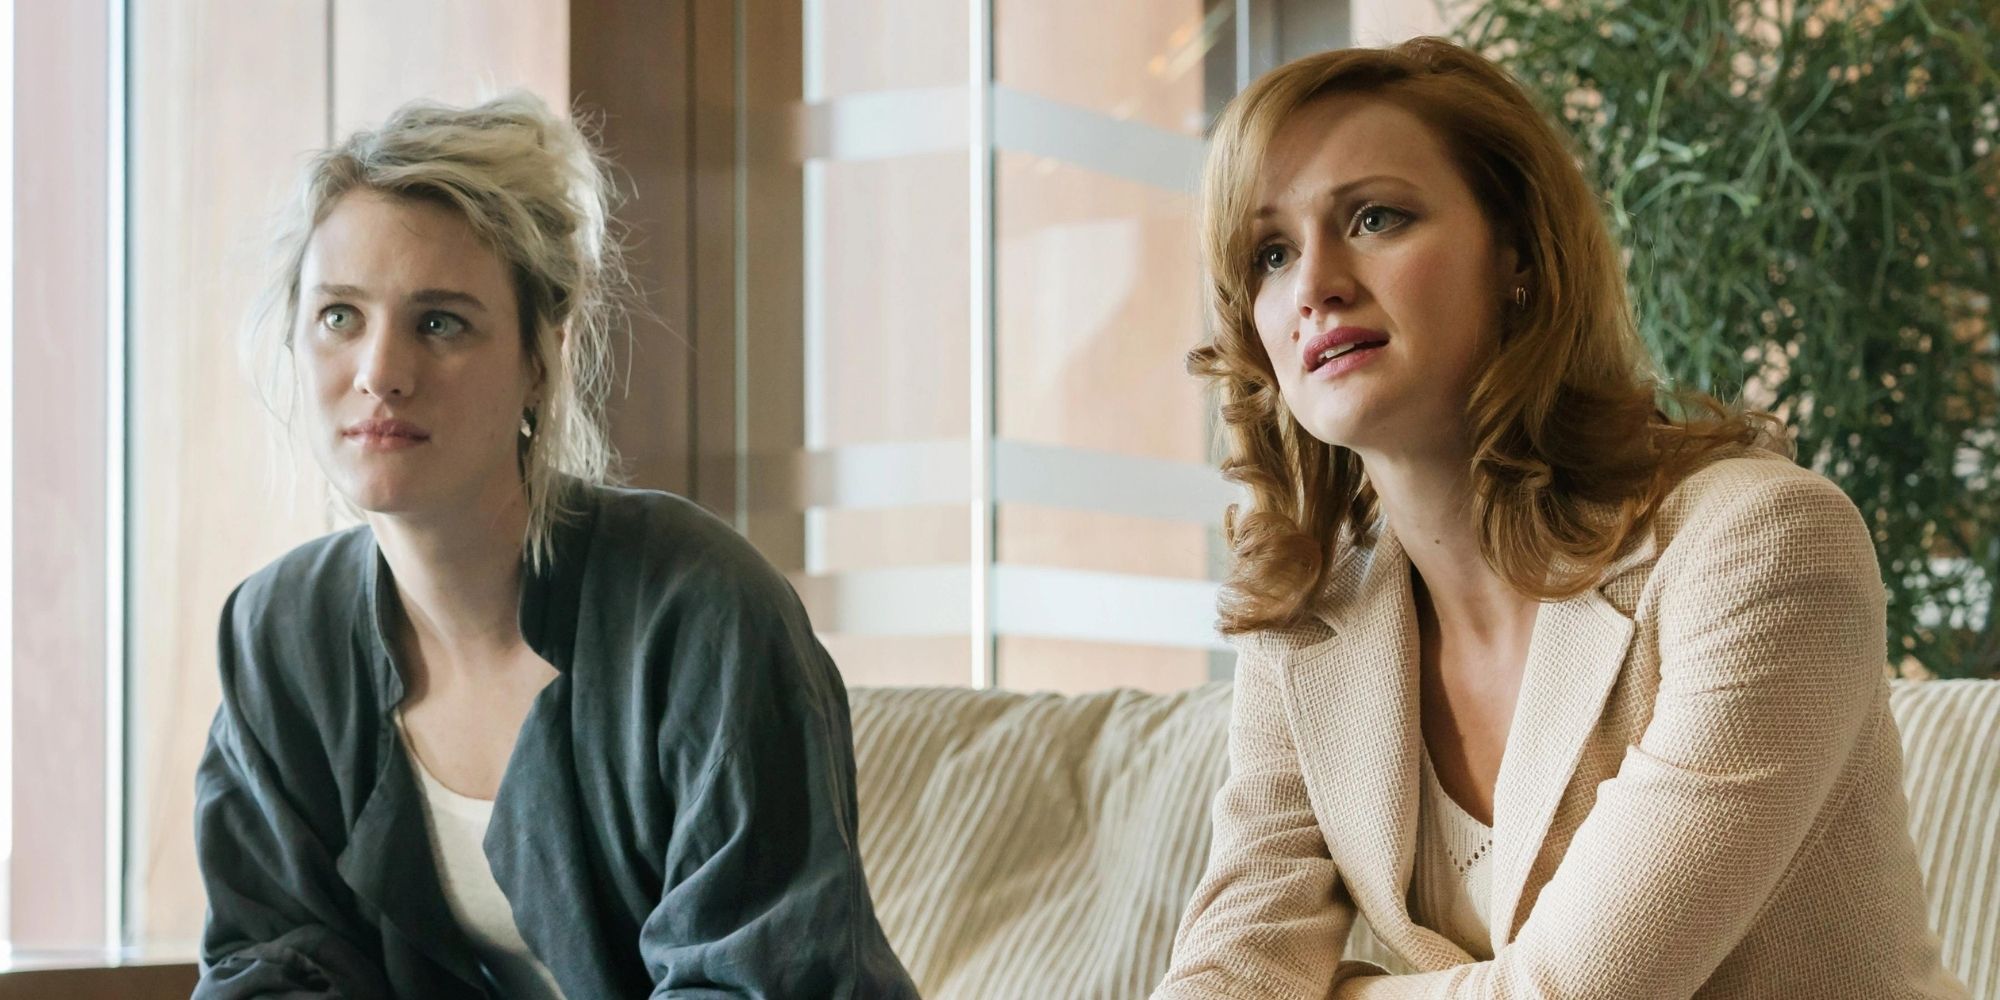 Two women sitting on a couch looking intense on Halt and Catch Fire.